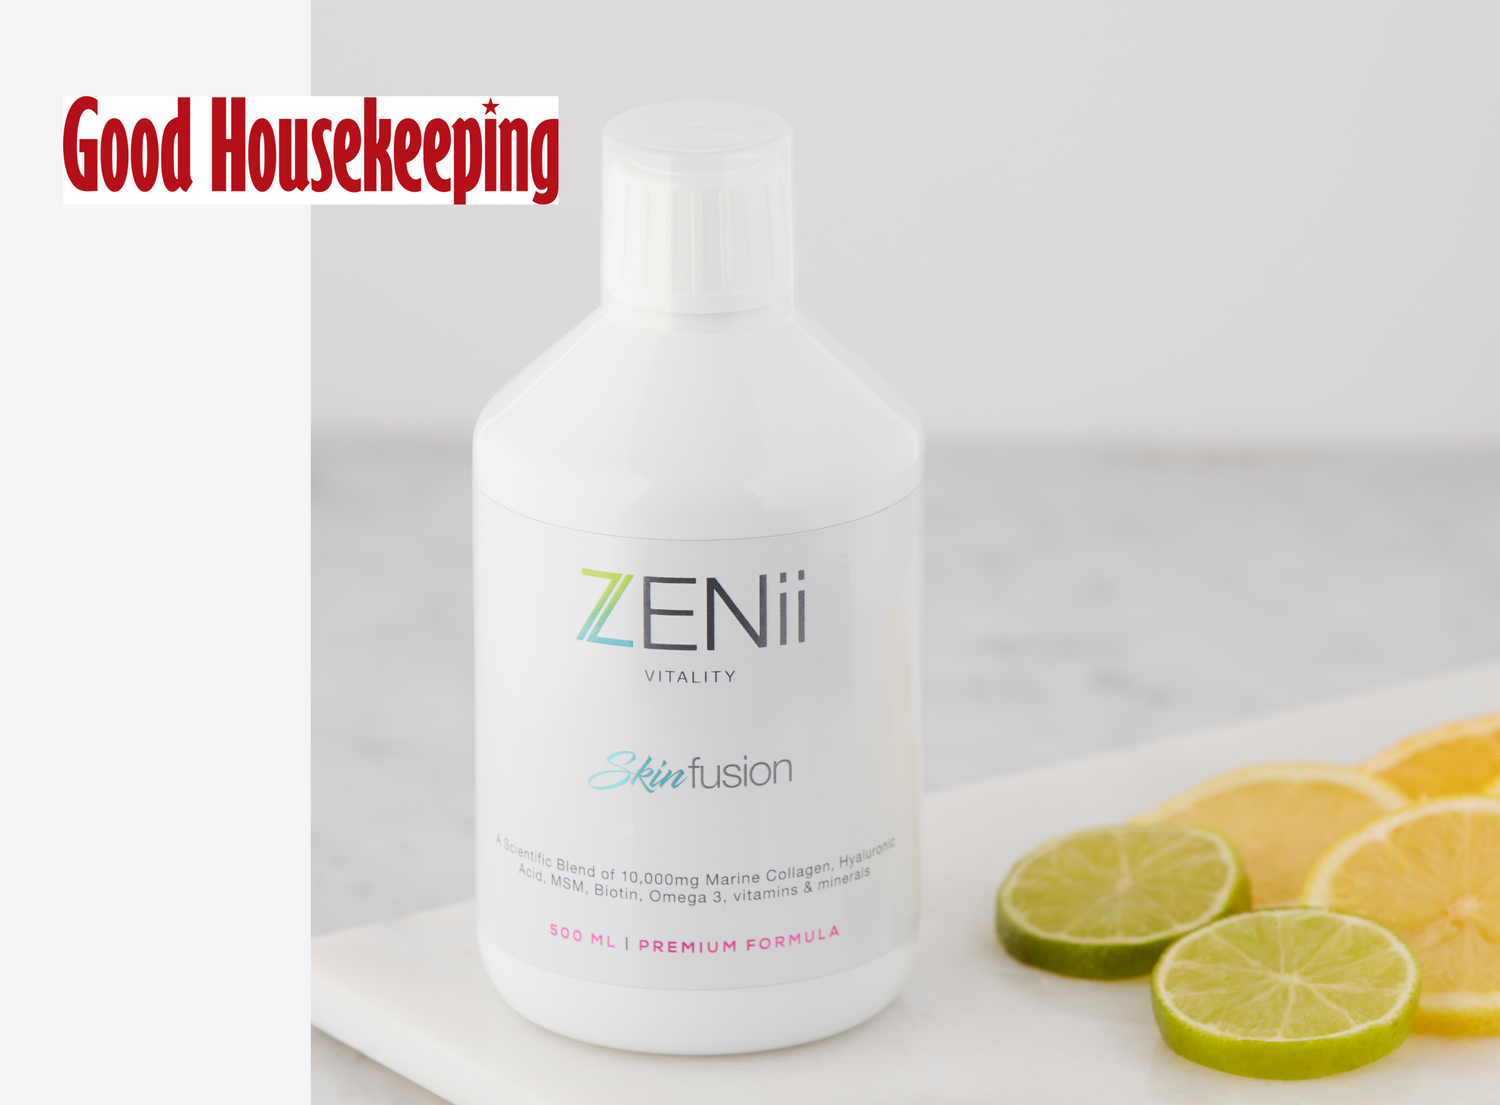 ZENii Fusion - Featured in Good Housekeeping